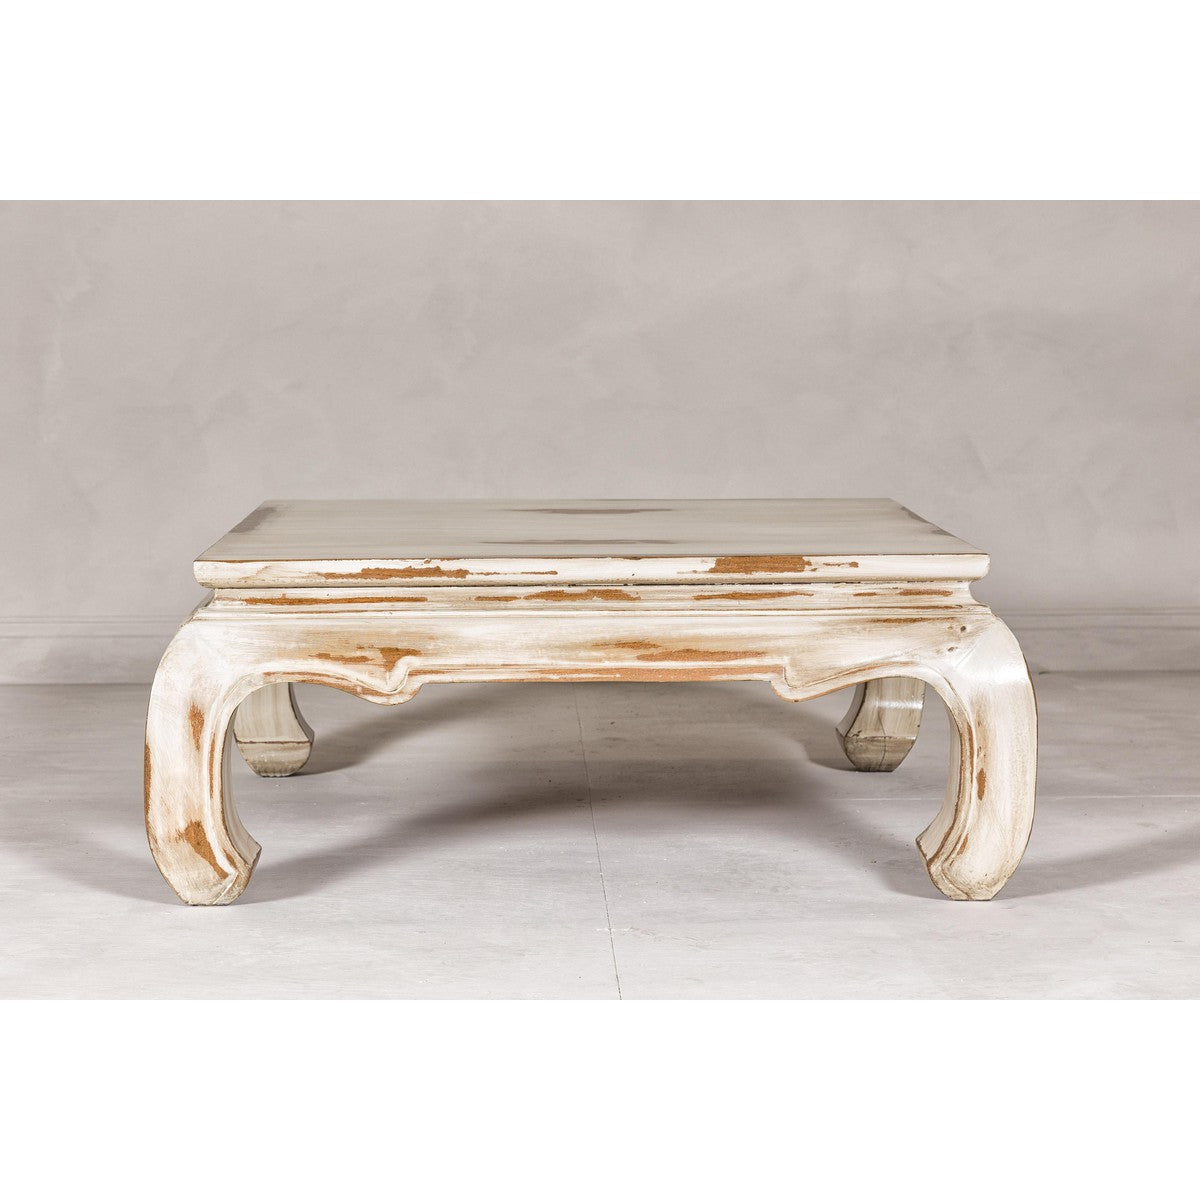 Distressed White Coffee Table with Chow Legs and Square Top, Vintage-YN7957-3. Asian & Chinese Furniture, Art, Antiques, Vintage Home Décor for sale at FEA Home